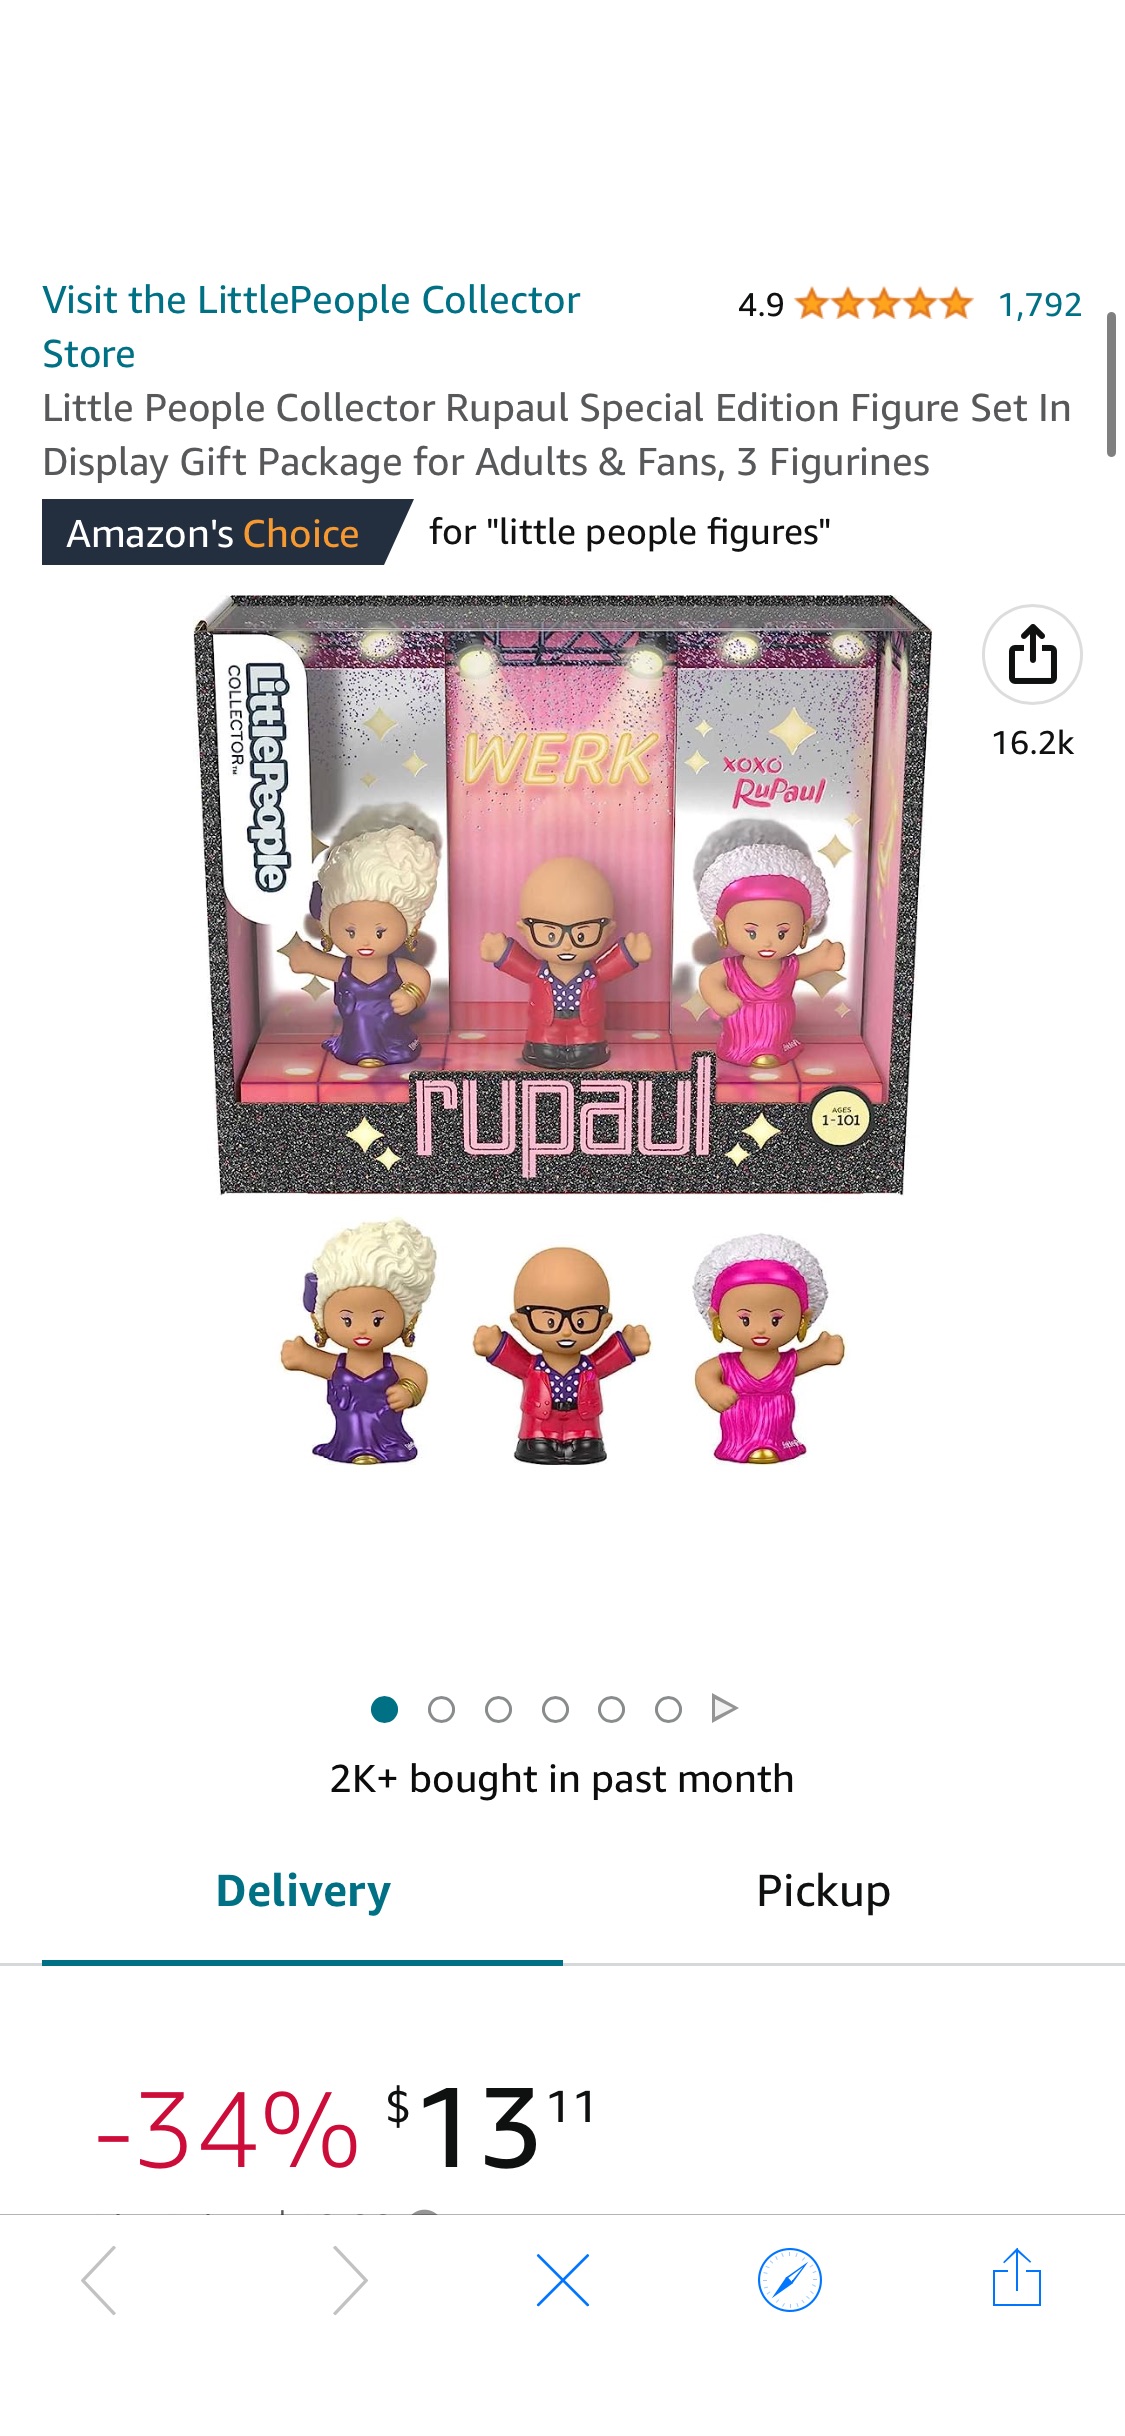 Amazon.com: Little People Collector Rupaul Special Edition Figure Set In Display Gift Package for Adults & Fans, 3 Figurines : RuPaul: Toys & Games